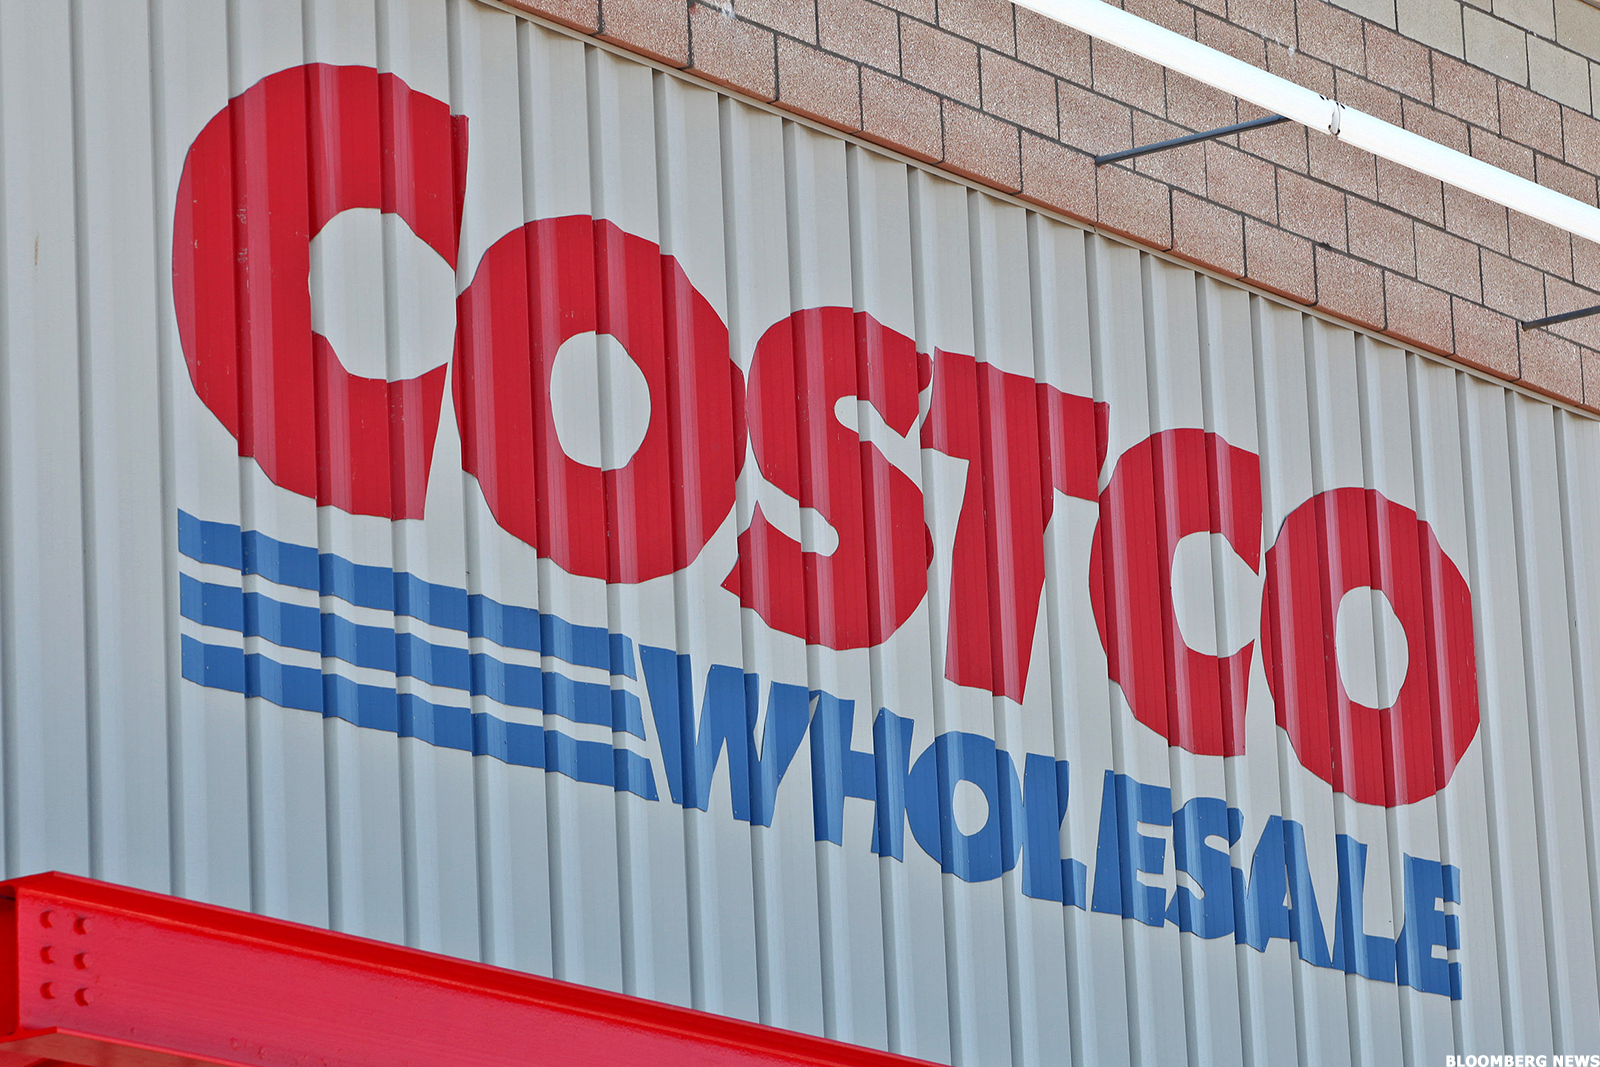 Trade Costco If You Must, But It’s Not for Me